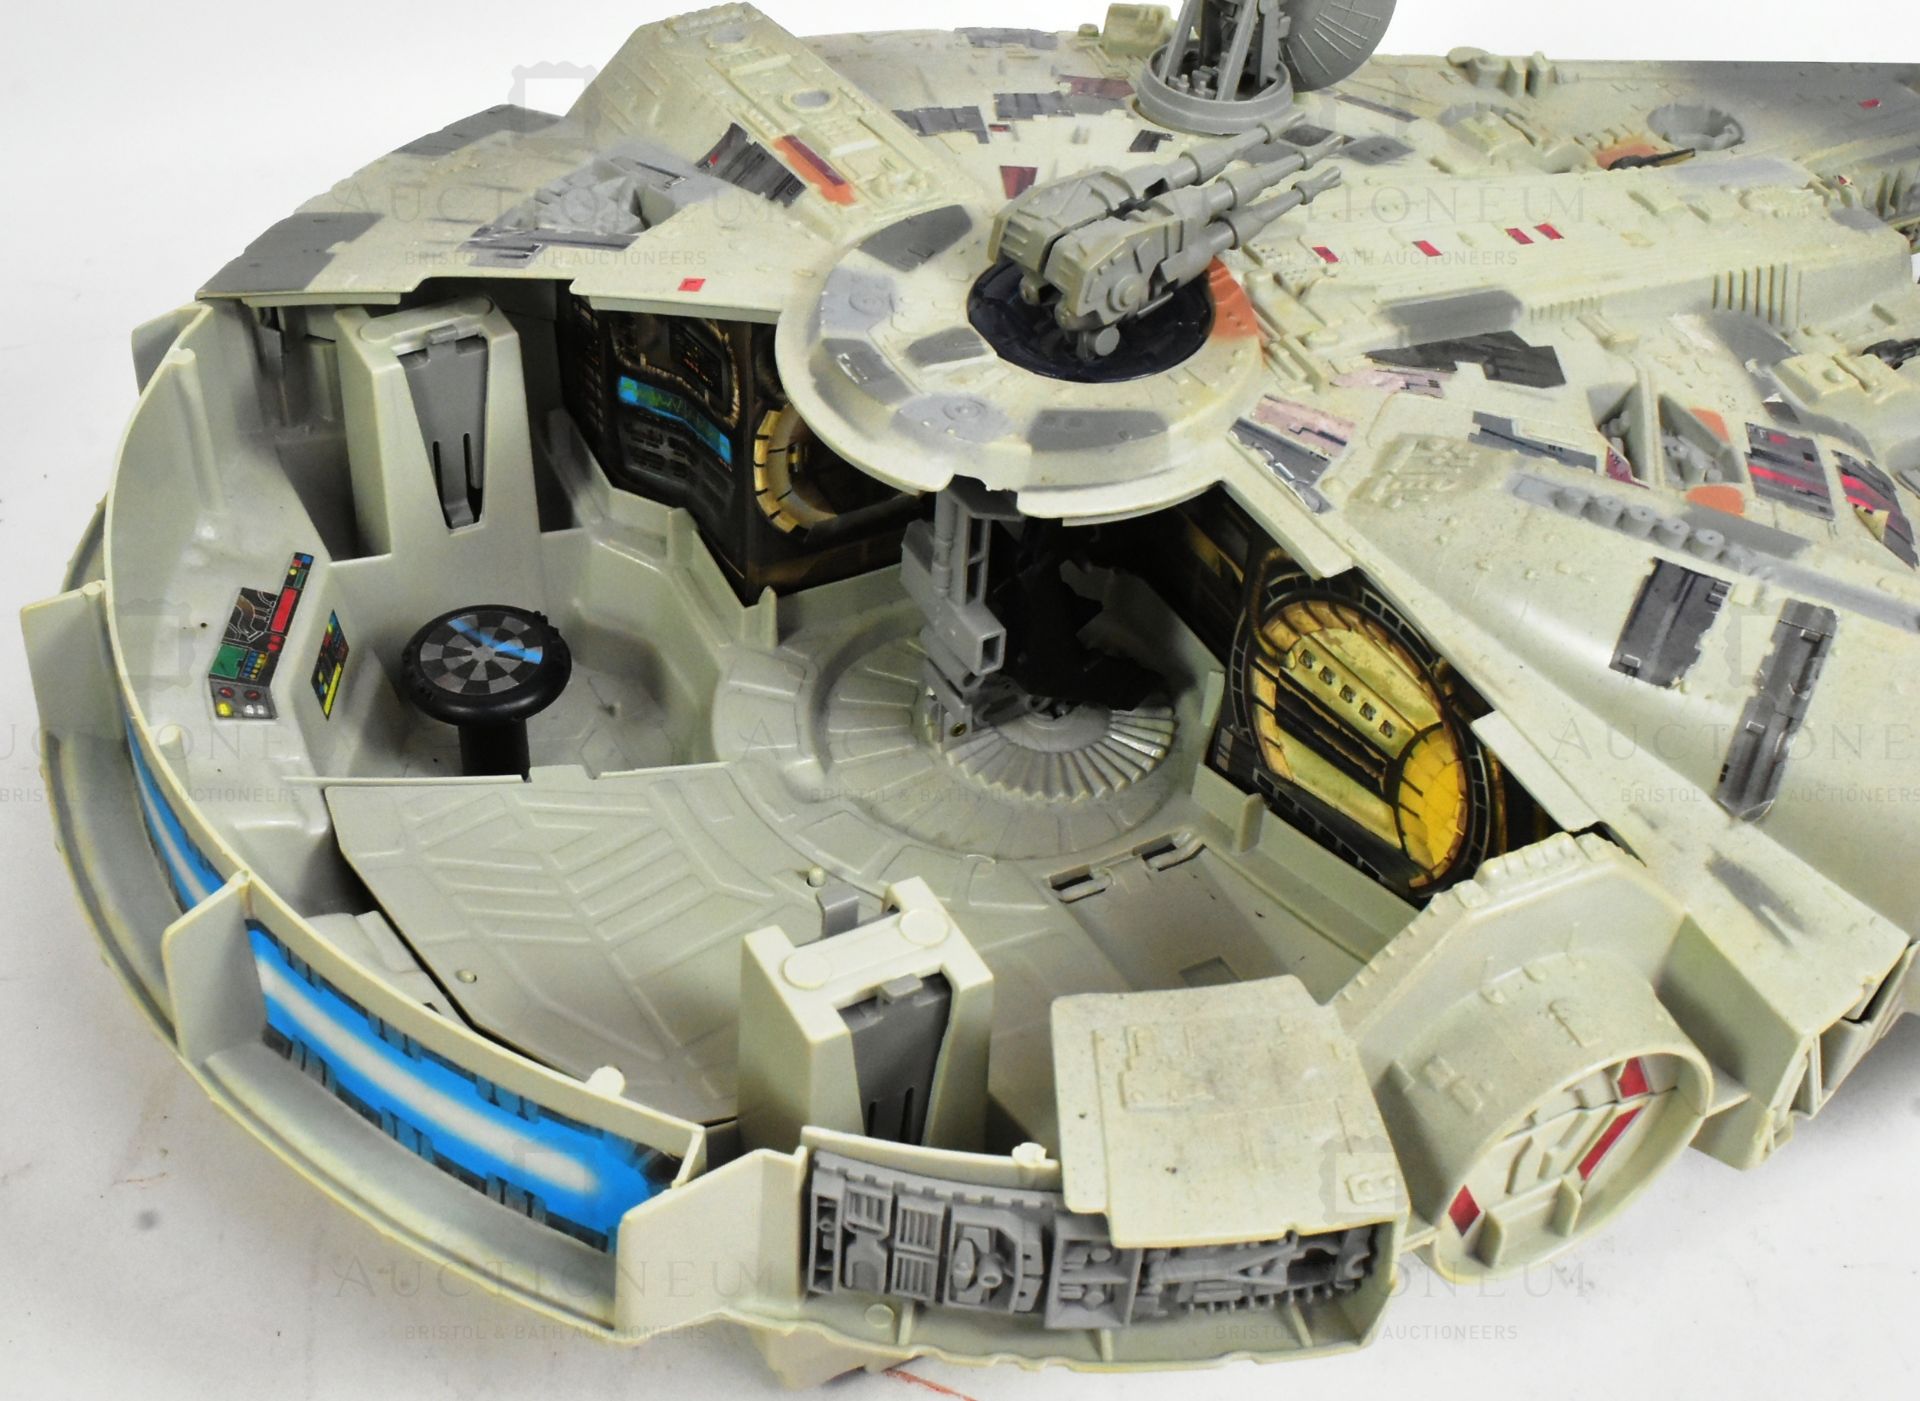 STAR WARS - 1995 KENNER ELECTRONIC MILLENNIUM FALCON - Image 3 of 6